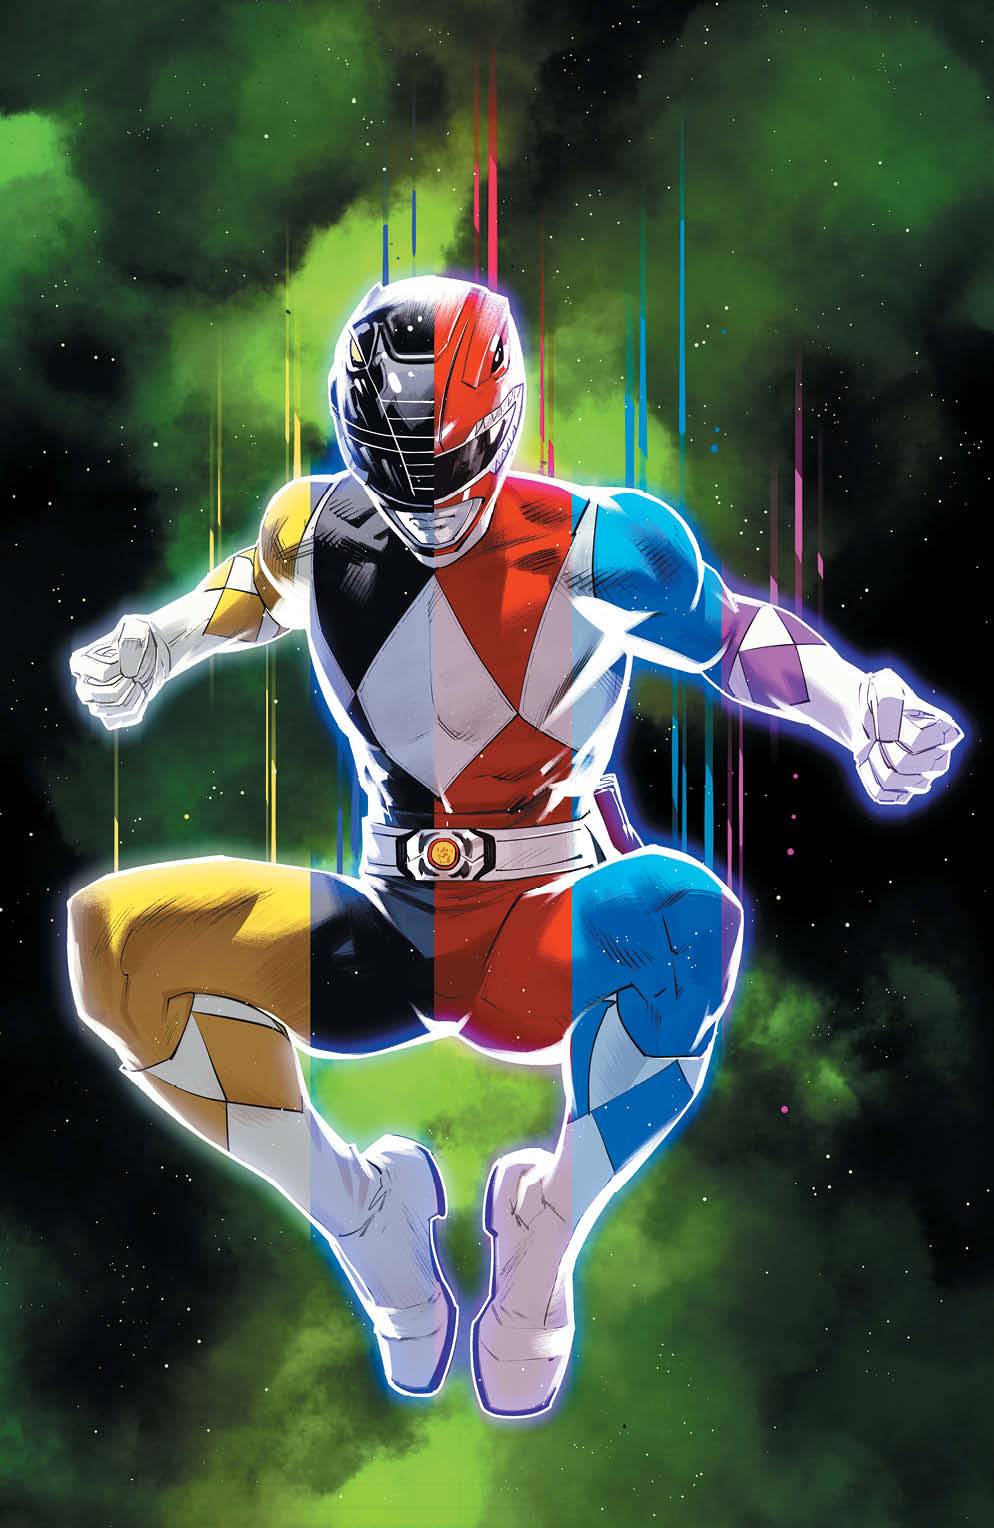 Mighty Morphin Power Rangers MMPR 30Th Anniversary Special #1 - Cover J Dan Mora